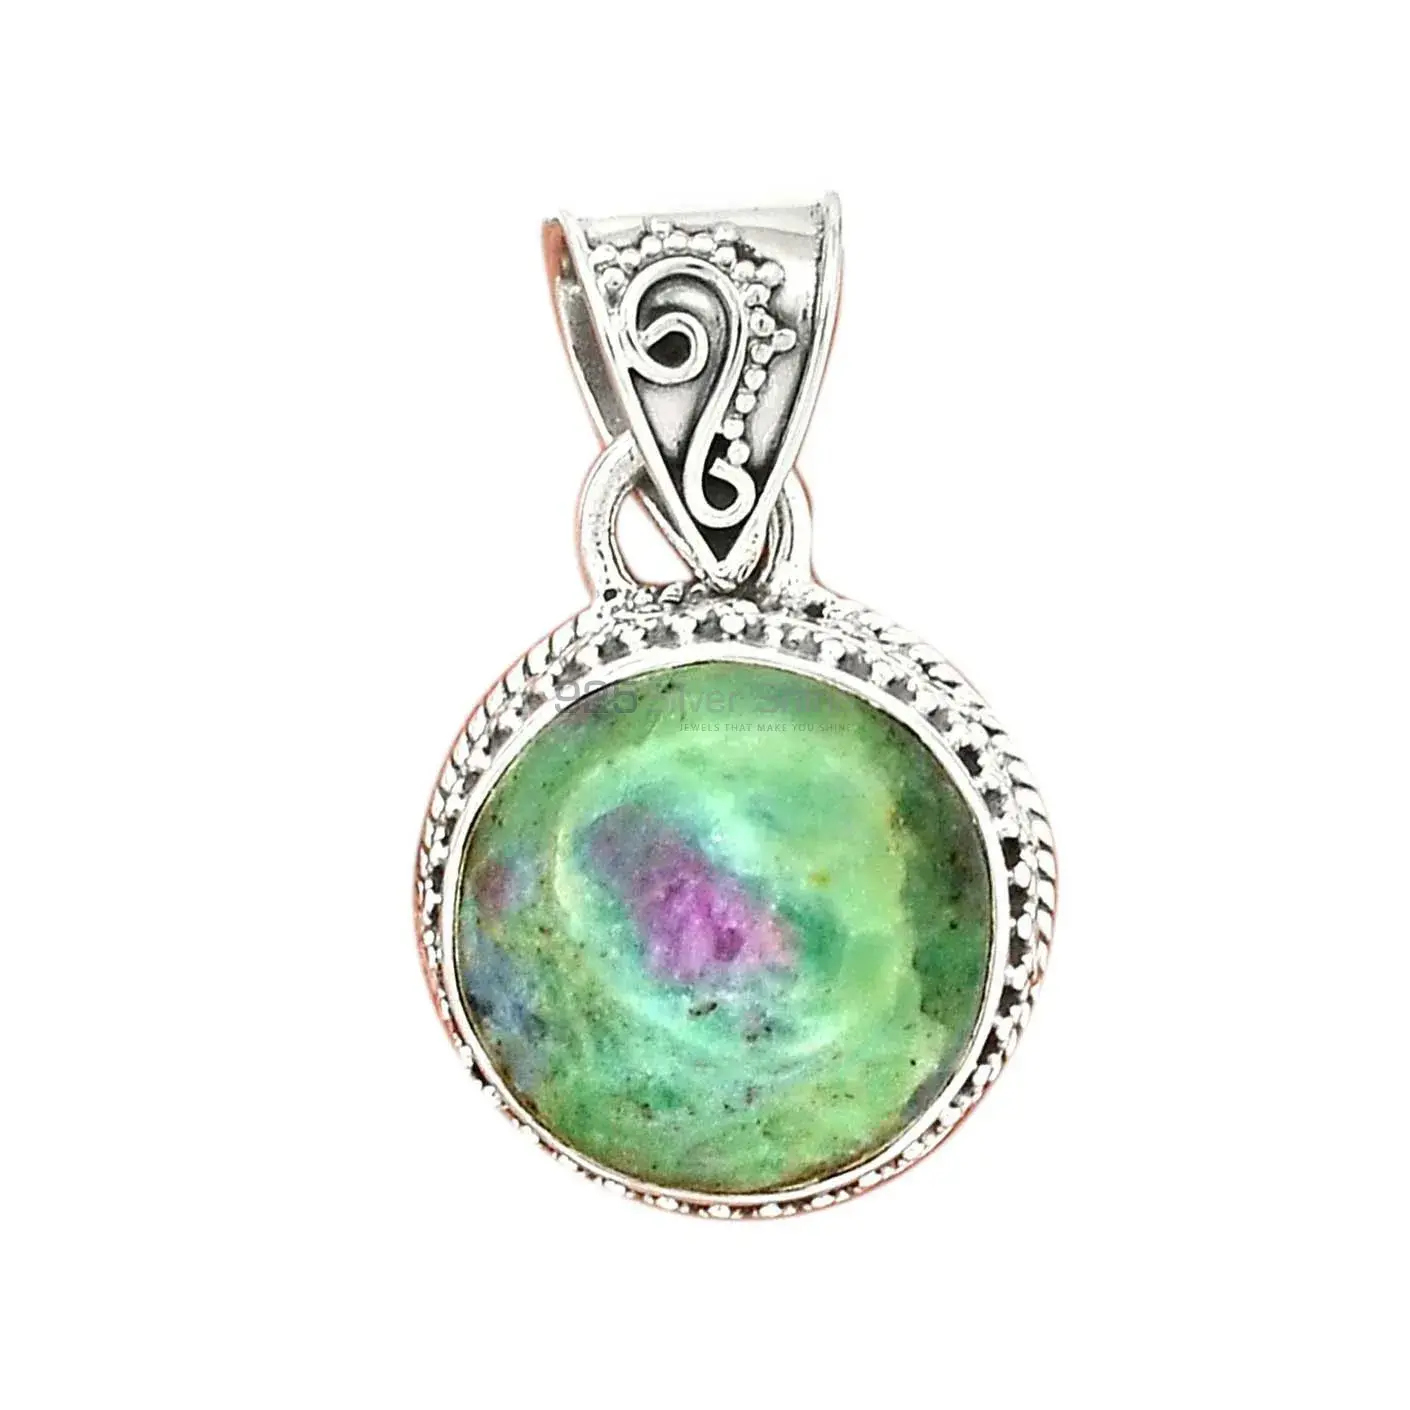 Natural Ruby Zoisite Gemstone Pendant In Sterling Silver Jewelry 925SPR01_1